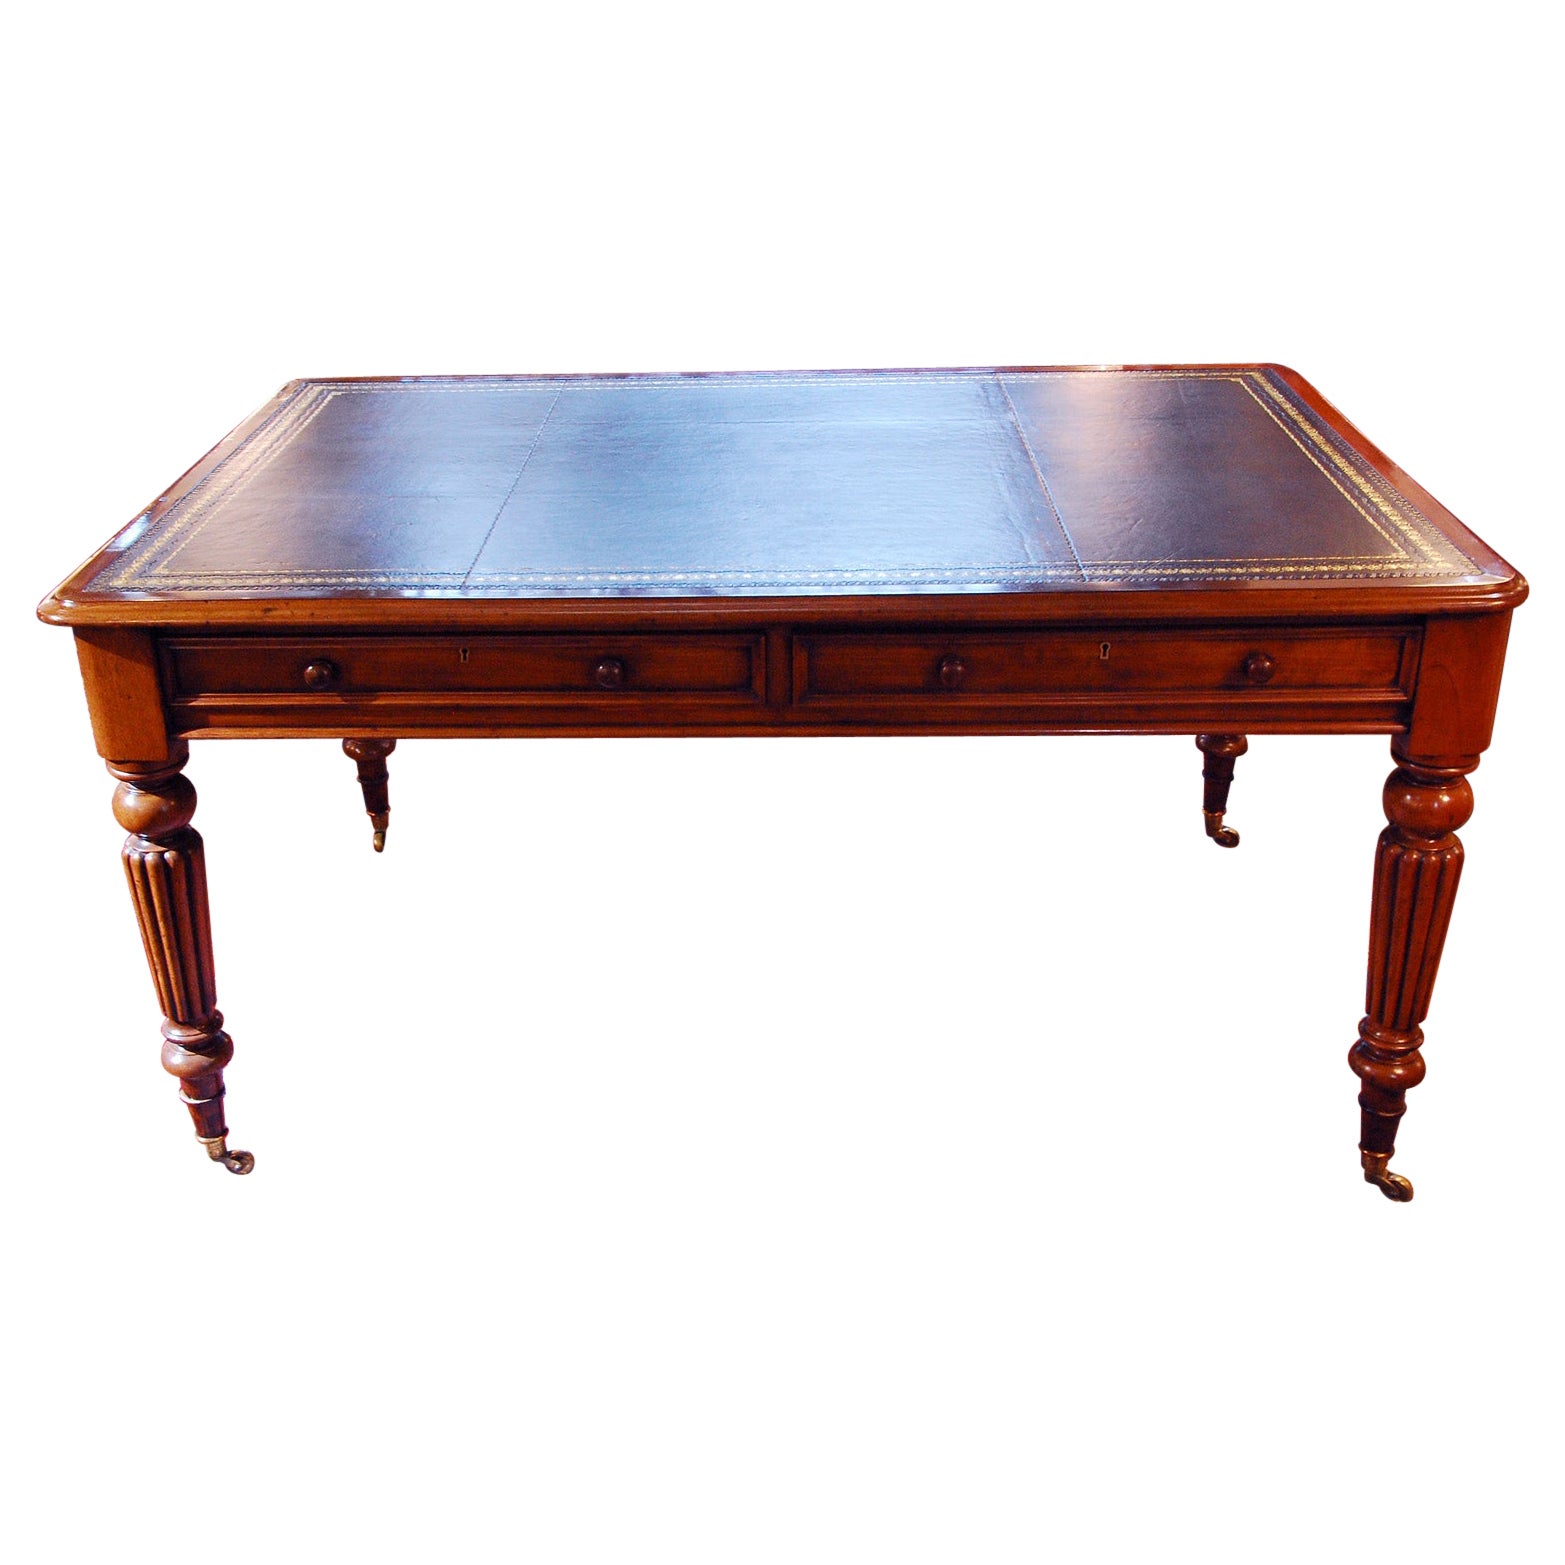 English Mid 19th Century Executive Writing Table, Reeded Legs Black Leather Top